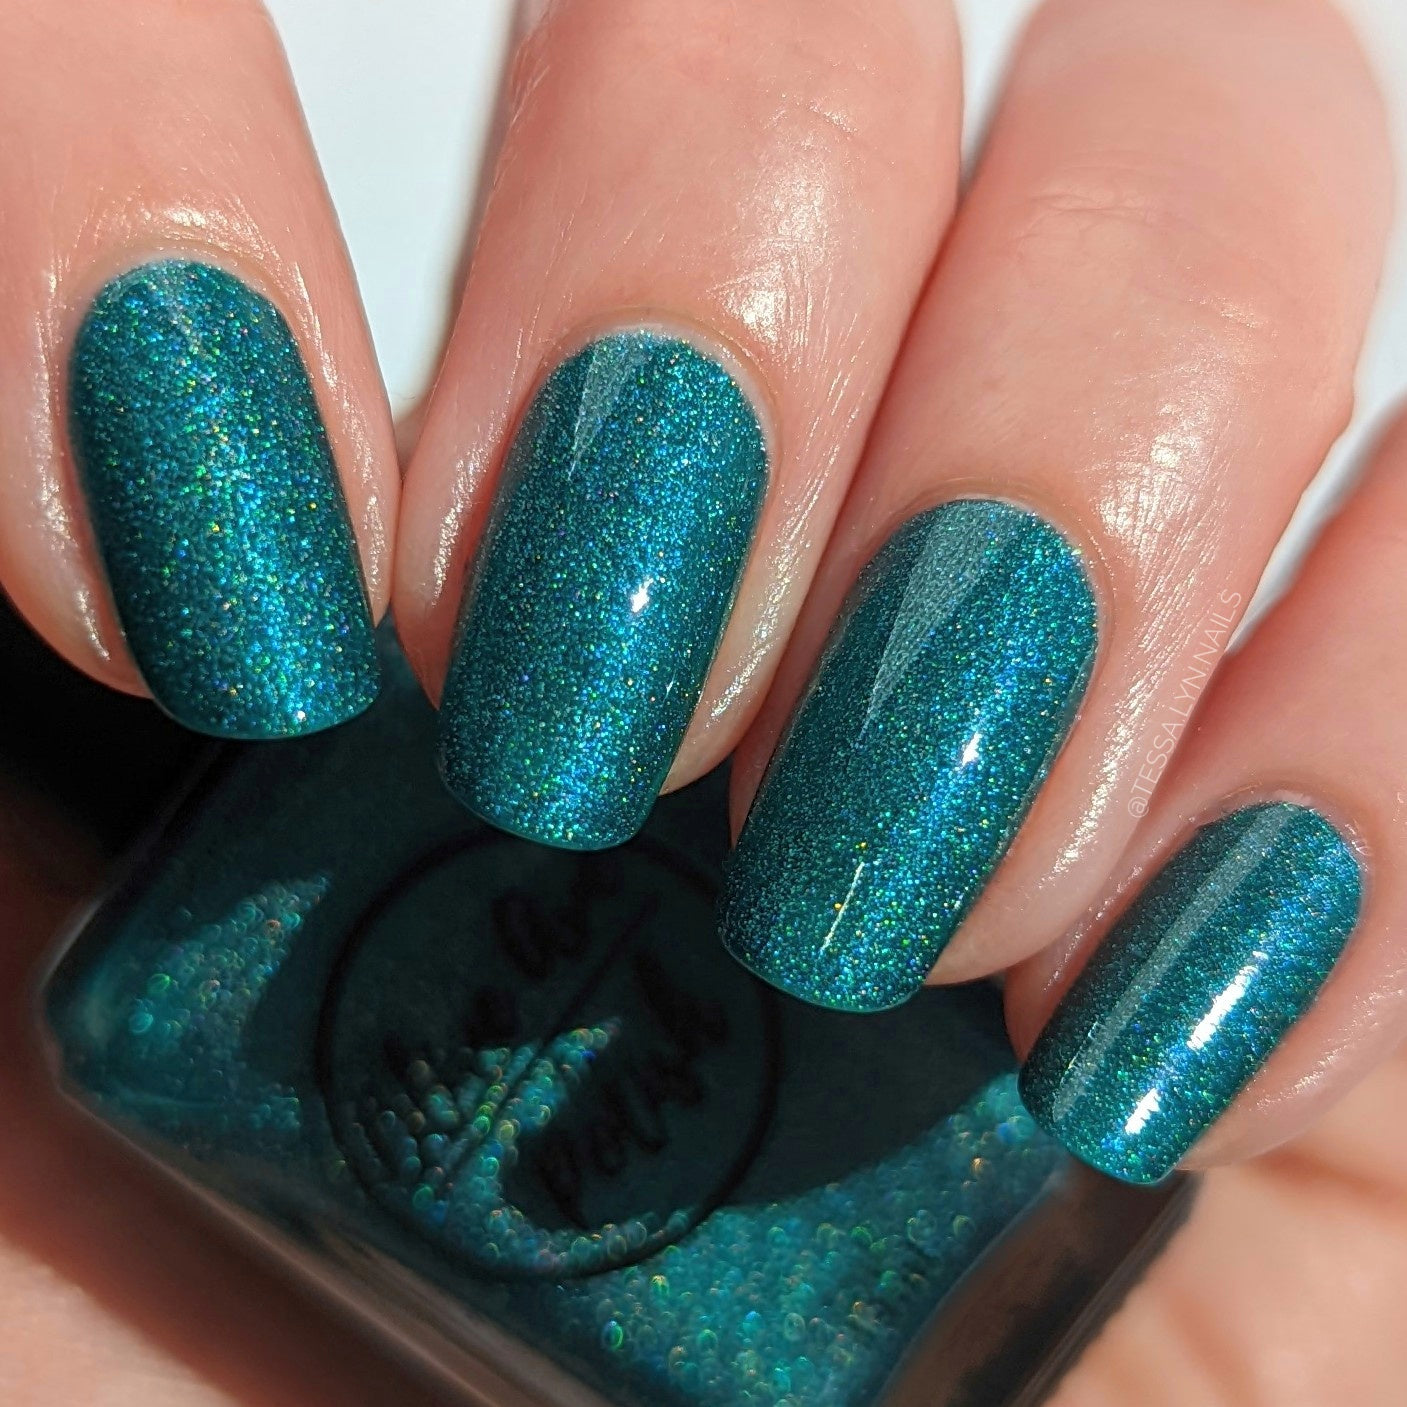 Teal Blue holographic nail polish swatch on pale skin tone